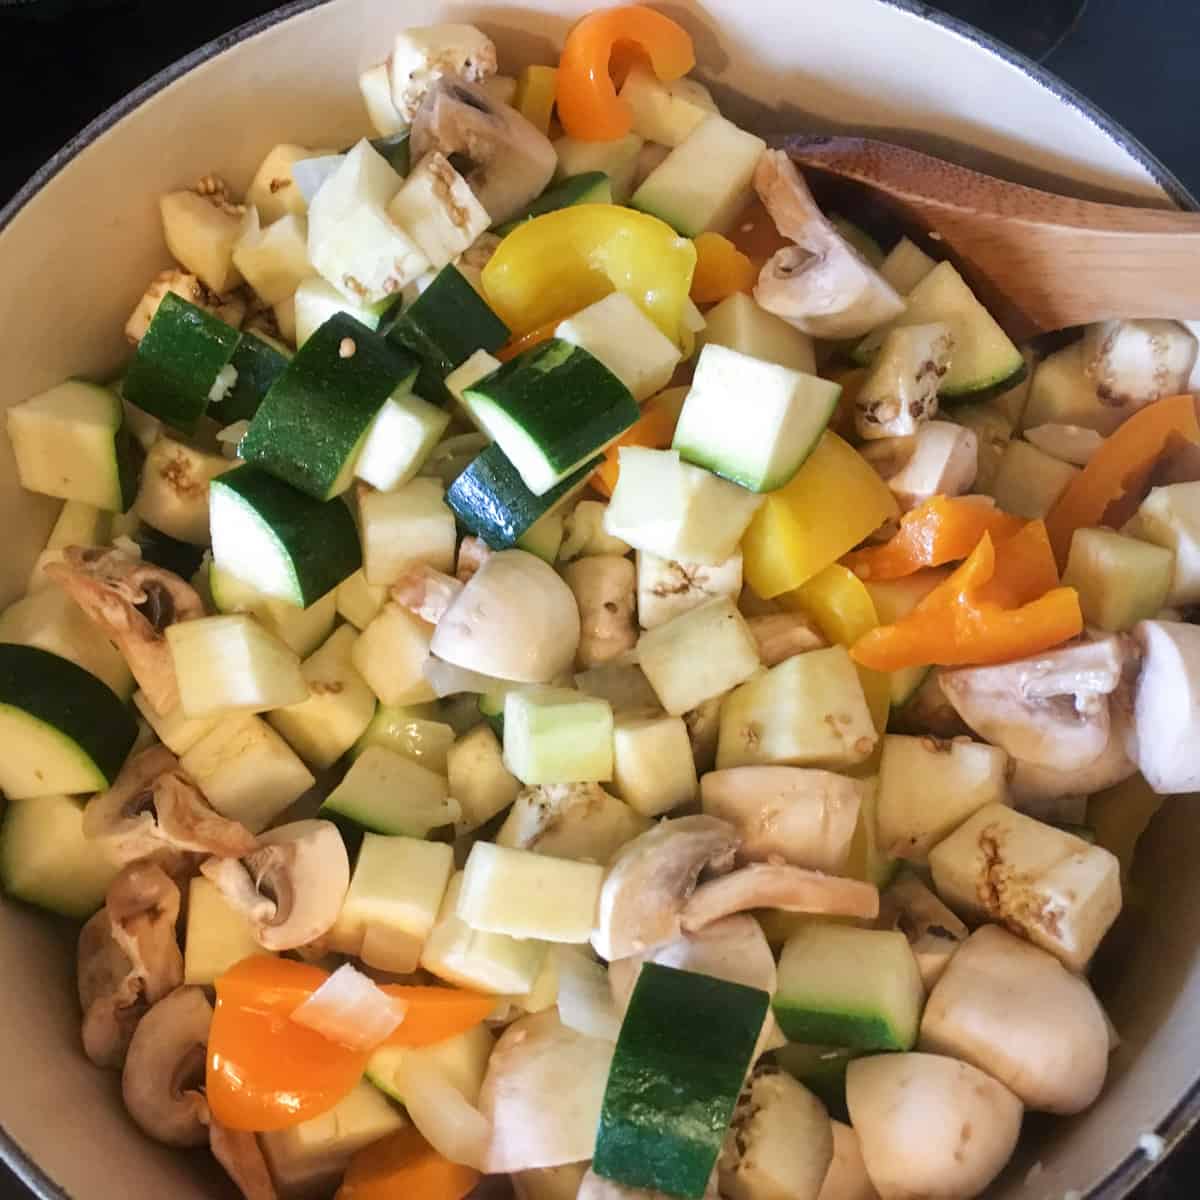 Chopped zucchini and other vegetables in a dutch oven.